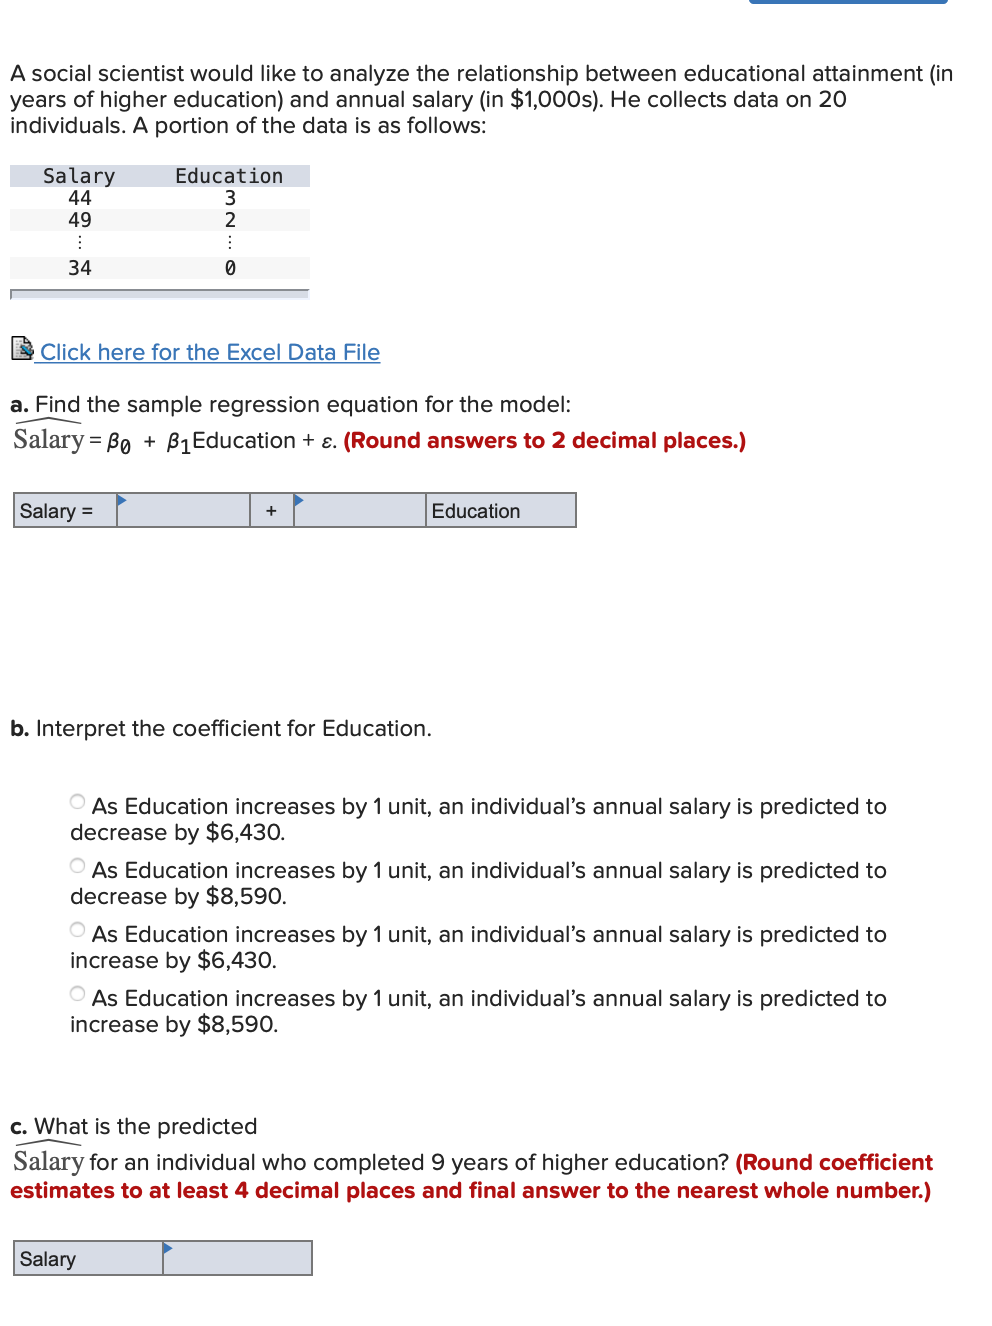 A social scientist would like to analyze the relationship between educational attainment (in
years of higher education) and annual salary (in $1,000s). He collects data on 20
individuals. A portion of the data is as follows:
Salary
44
49
Education
34
Click here for the Excel Data File
a. Find the sample regression equation for the model:
Salary = Bo + B1Education + ɛ. (Round answers to 2 decimal places.)
Salary =
Education
b. Interpret the coefficient for Education.
O As Education increases by 1 unit, an individual's annual salary is predicted to
decrease by $6,430.
O As Education increases by 1 unit, an individual's annual salary is predicted to
decrease by $8,590.
O As Education increases by 1 unit, an individual's annual salary is predicted to
increase by $6,430.
O As Education increases by 1 unit, an individual's annual salary is predicted to
increase by $8,590.
c. What is the predicted
Salary for an individual who completed 9 years of higher education? (Round coefficient
estimates to at least 4 decimal places and final answer to the nearest whole number.)
Salary
